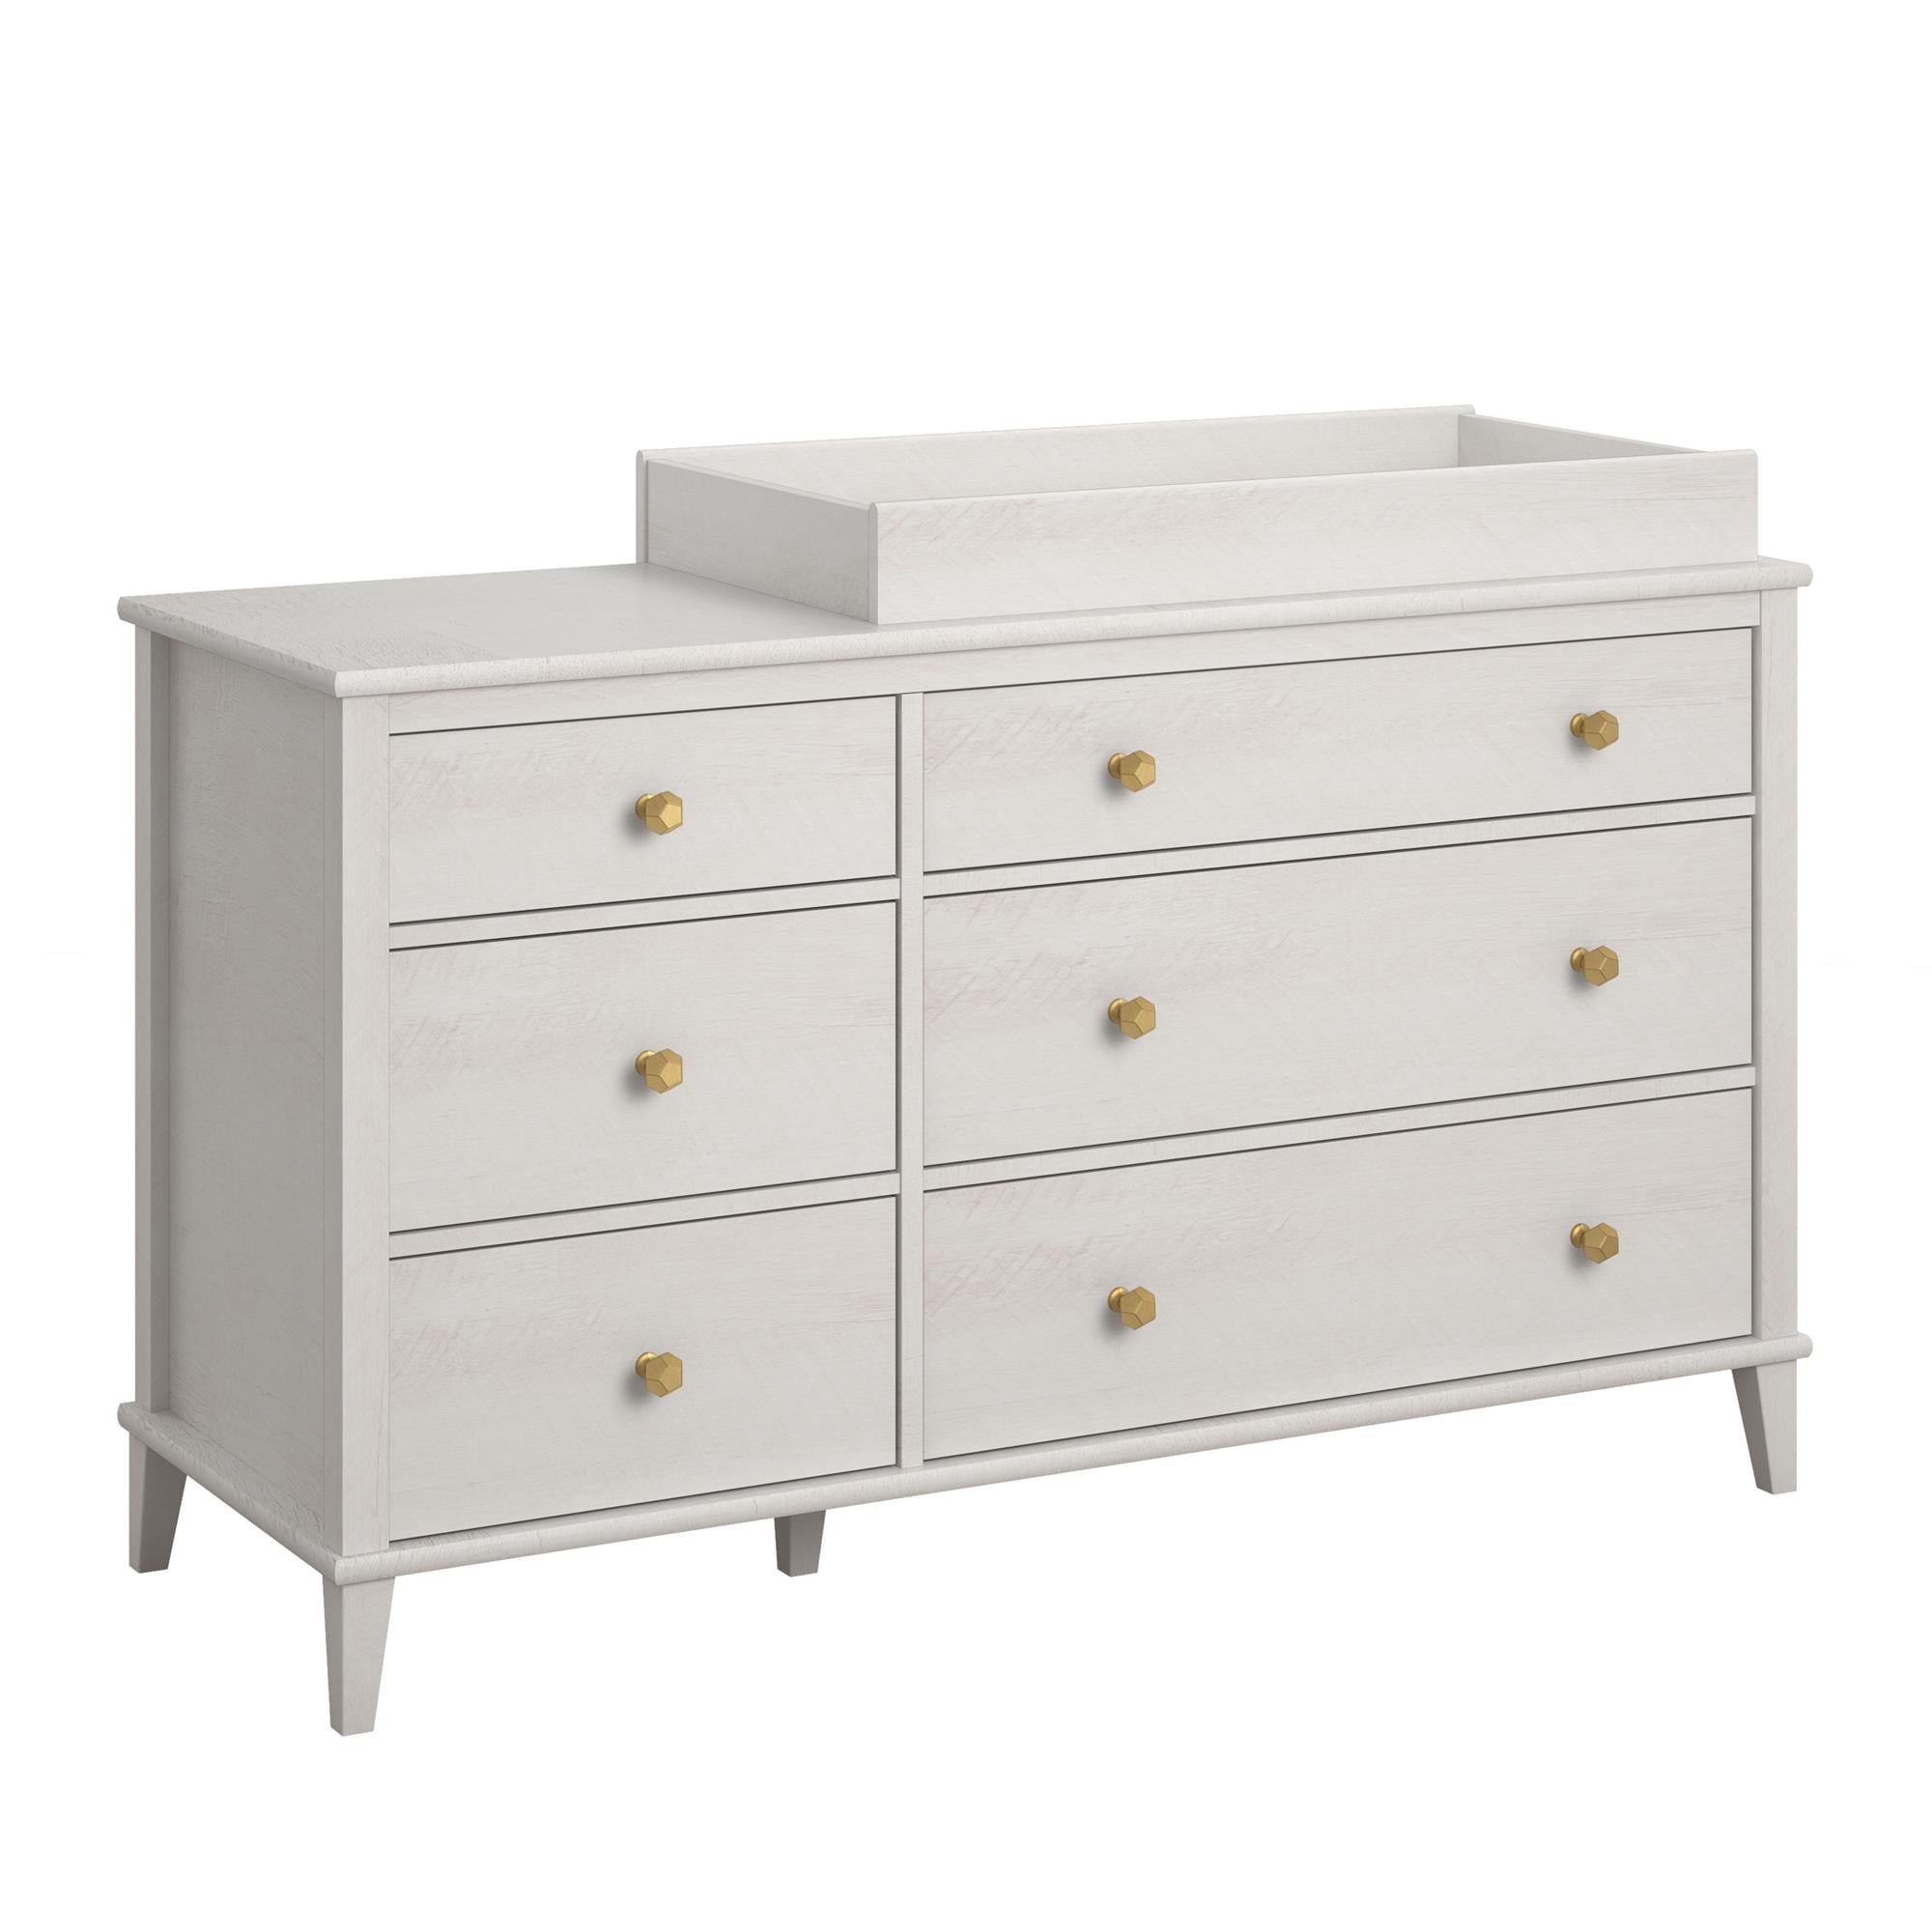 Little Seeds Monarch Hill Poppy 6 Drawer Changing Table Ivory Oak